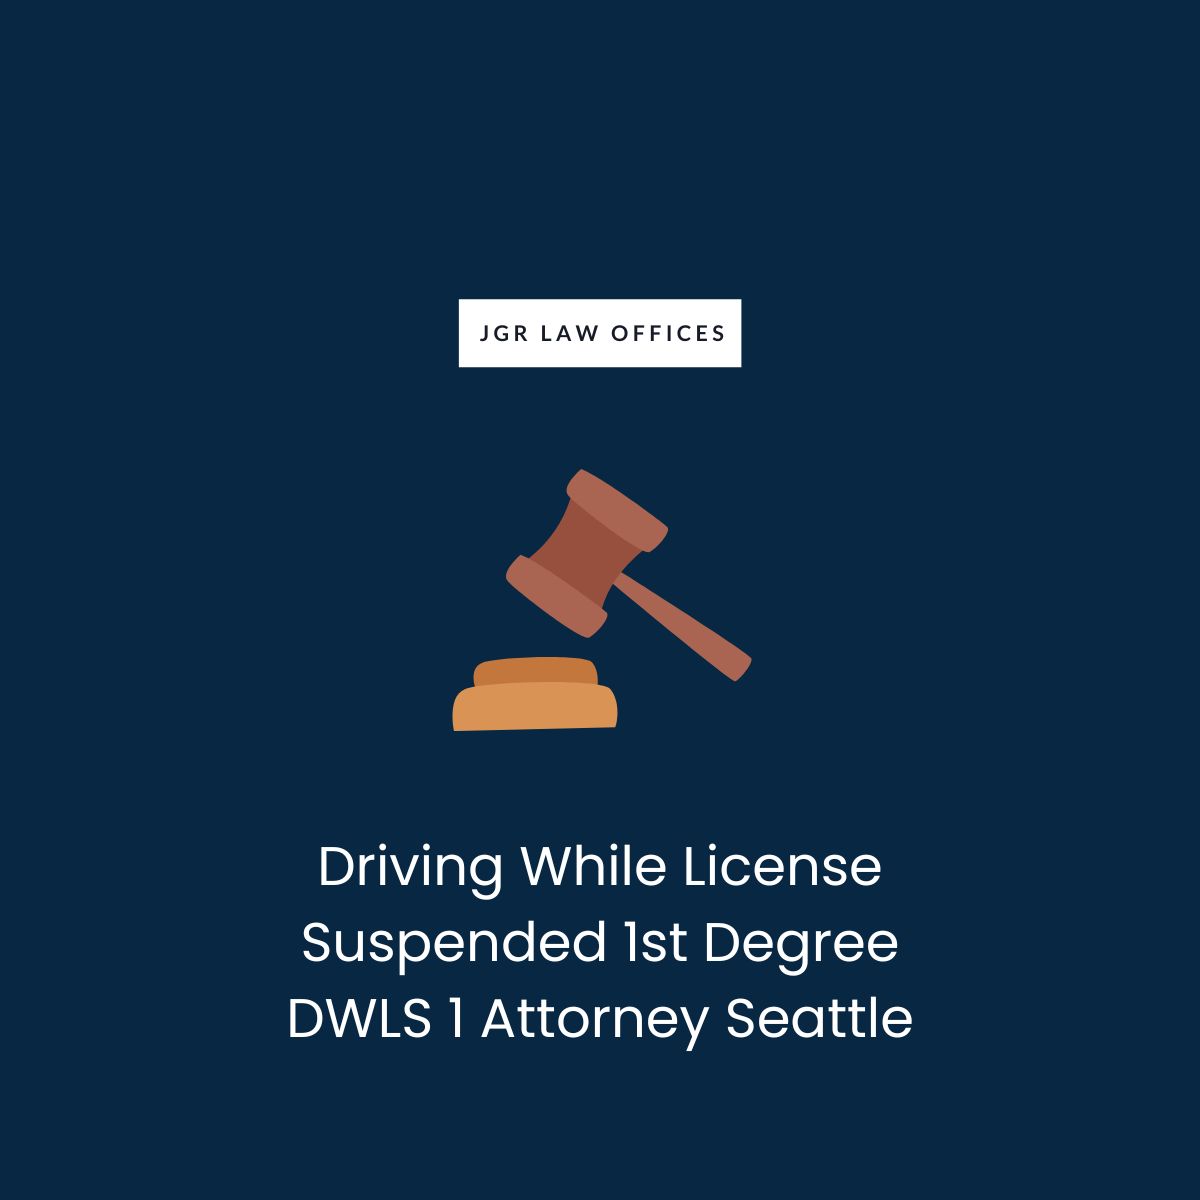 Driving While License Suspended 1st Degree DWLS 1 Attorney Seattle